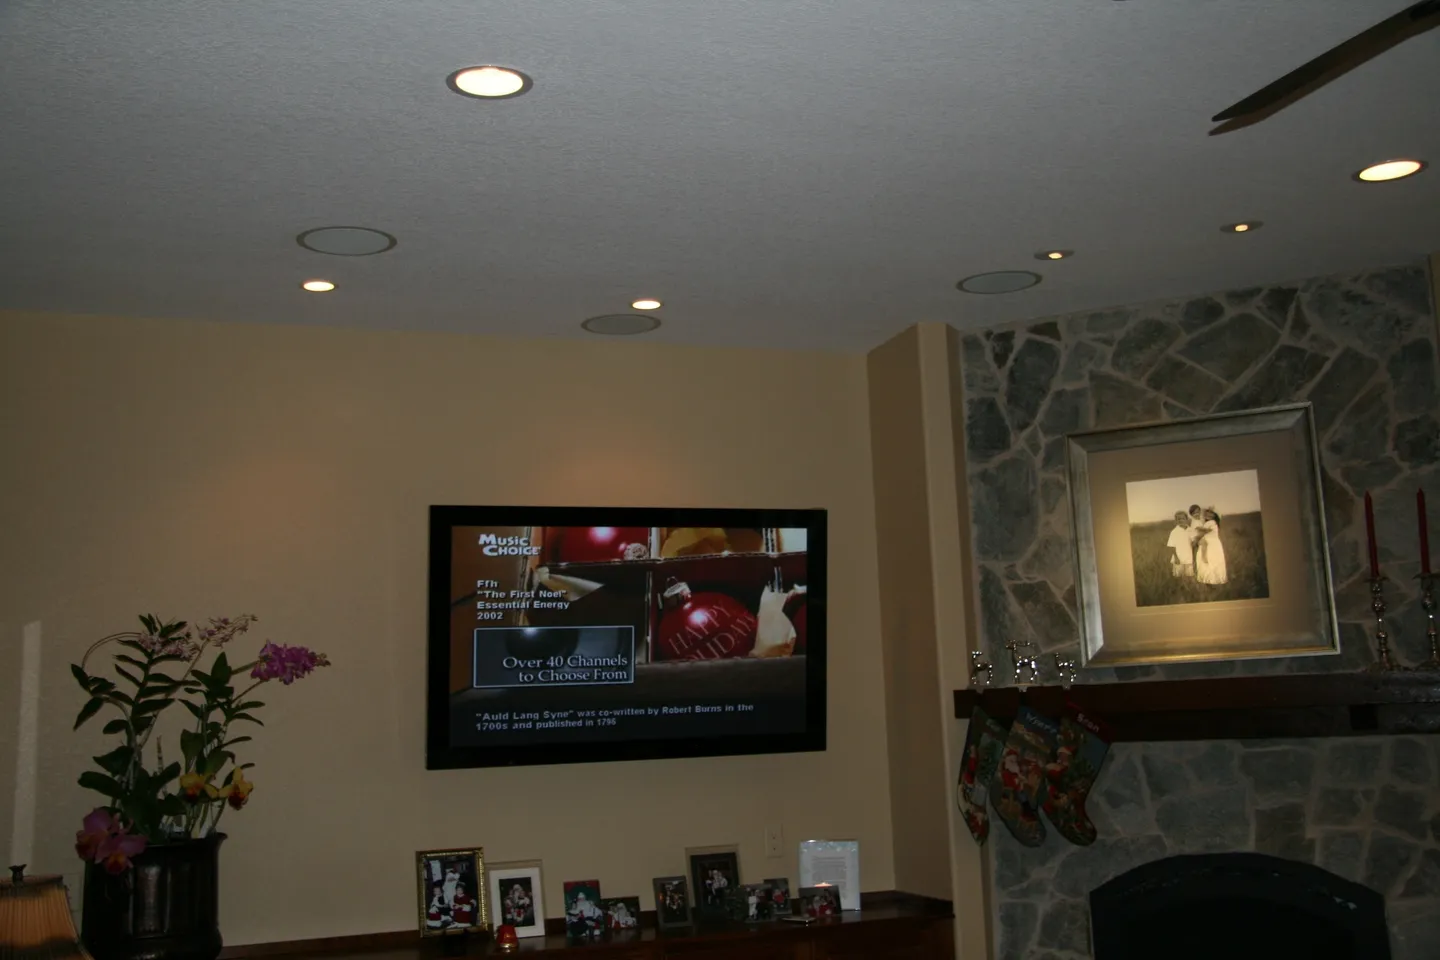 A television mounted on the wall above a fireplace.